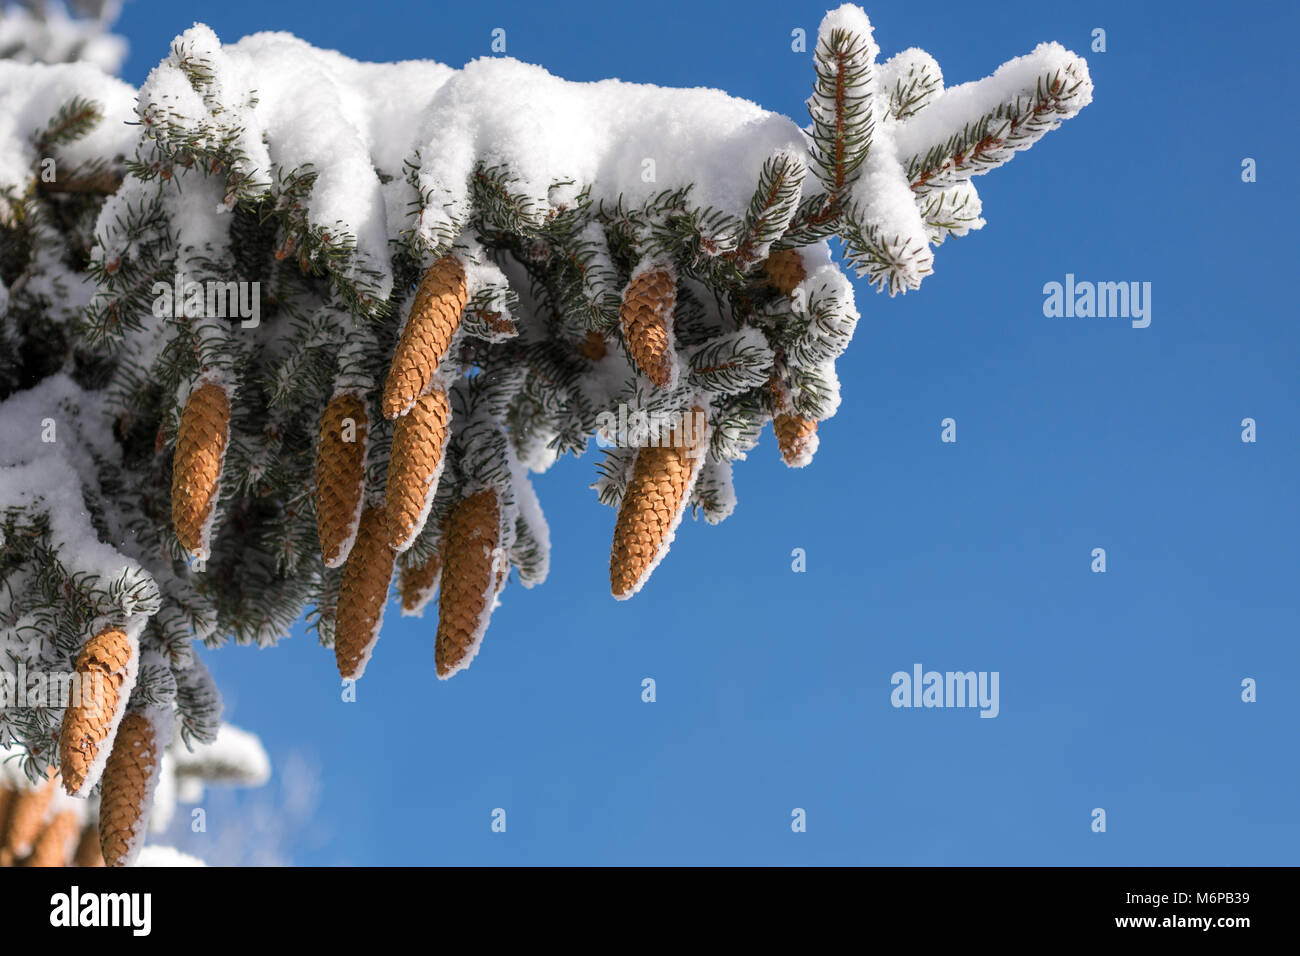 Spruce branches and cones covered with white snow against cloudless blue sky with copy space Stock Photo